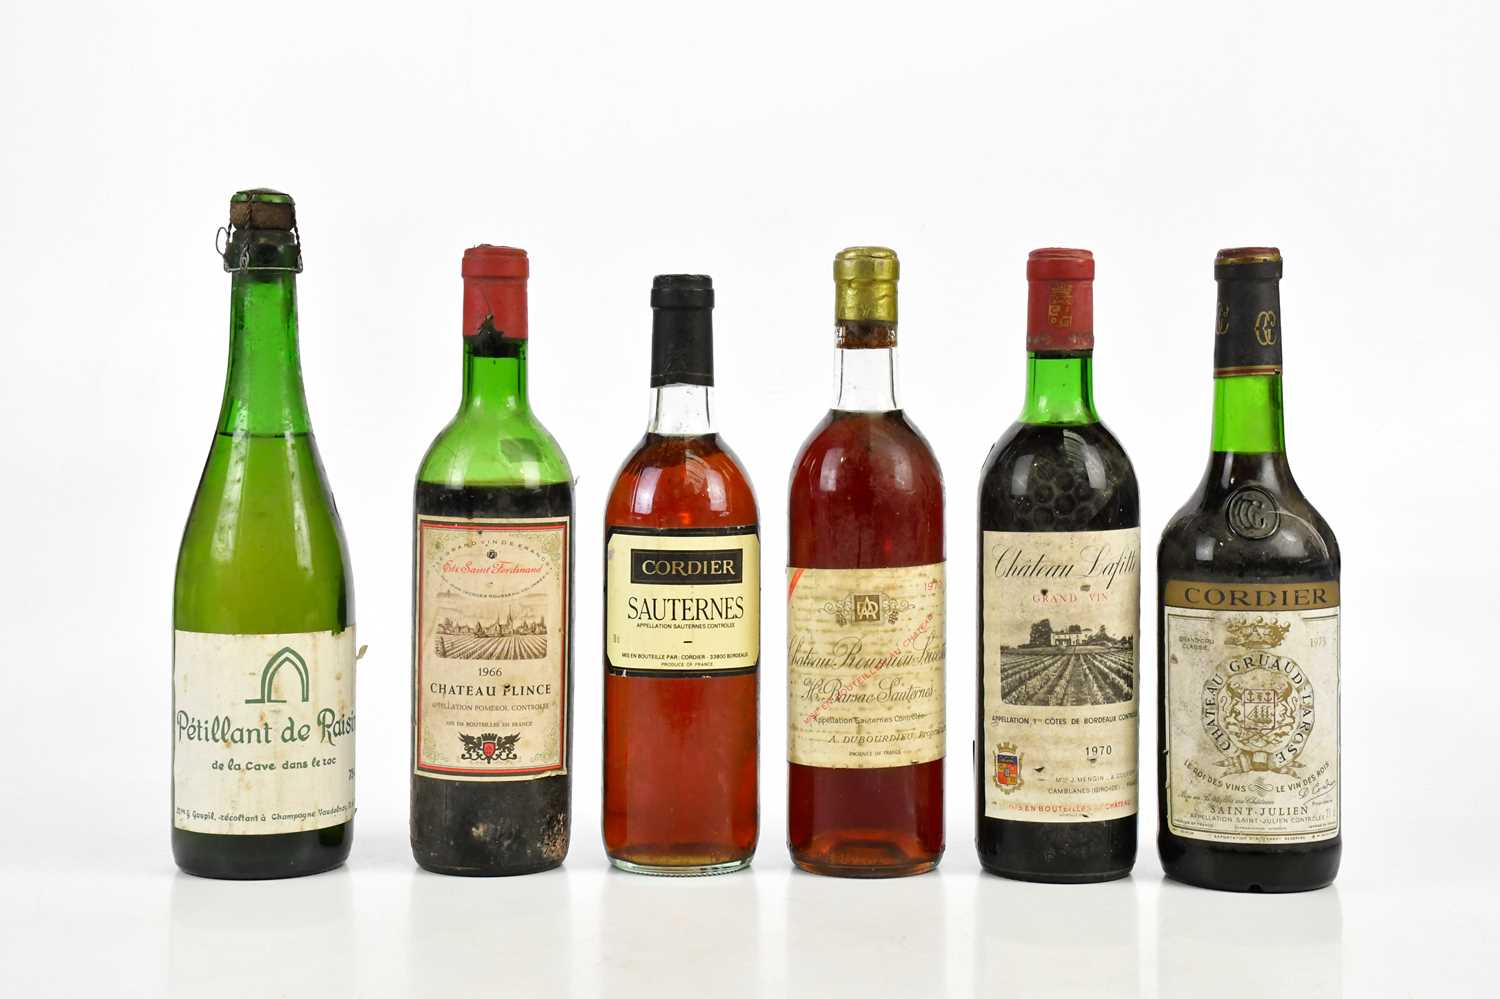 RED WINE: a bottle of Chateau Lafitte Grand Vin 1970, a bottle of Chateau Roumieu Lacoste 1970, a